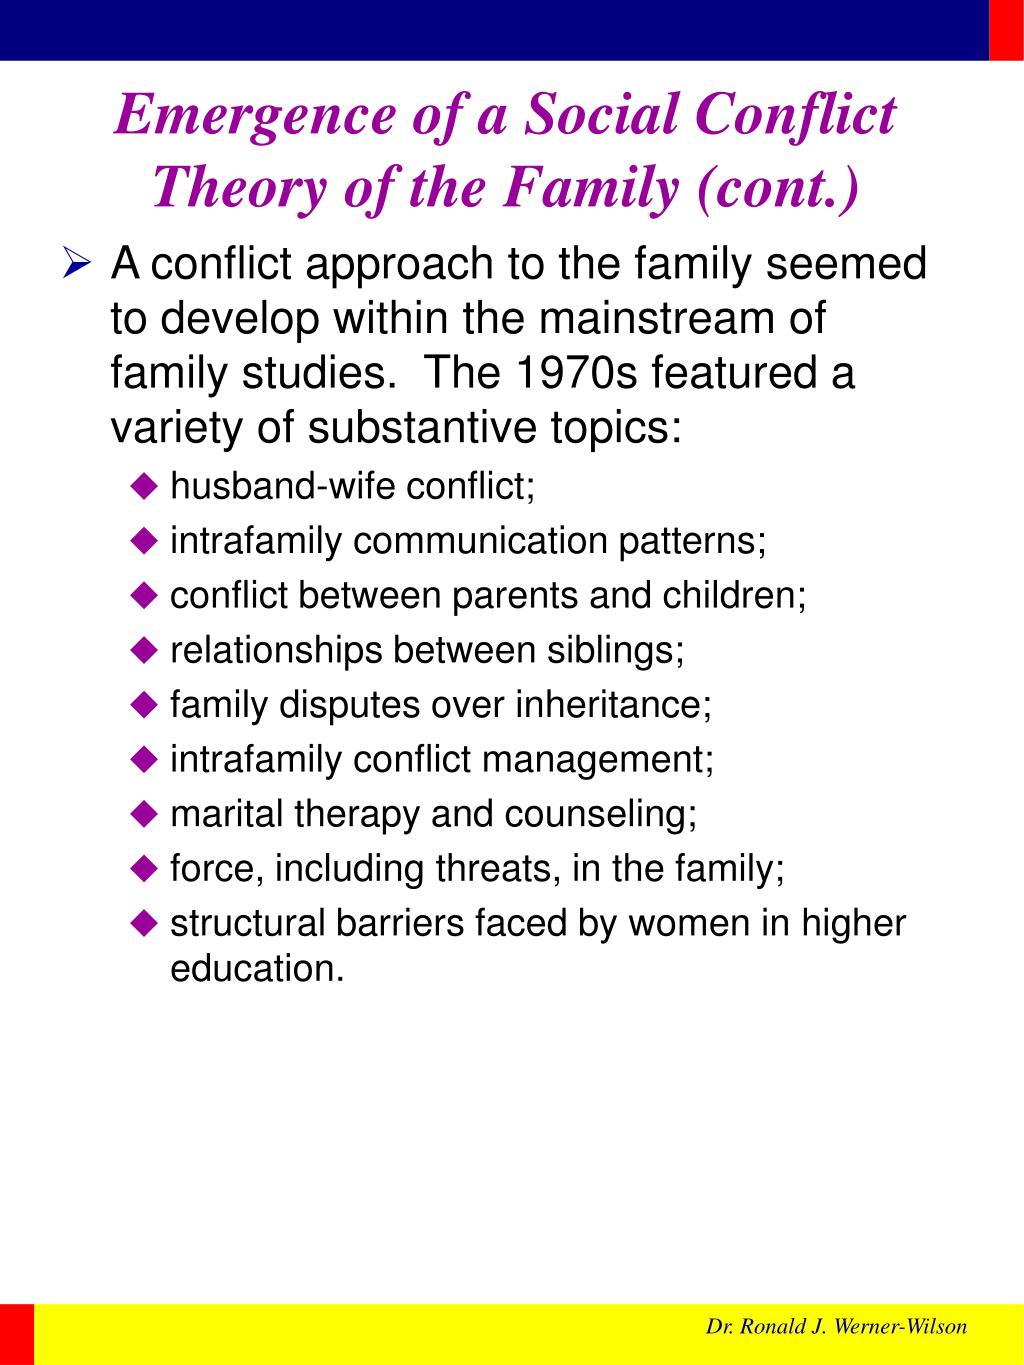 research paper about family conflict